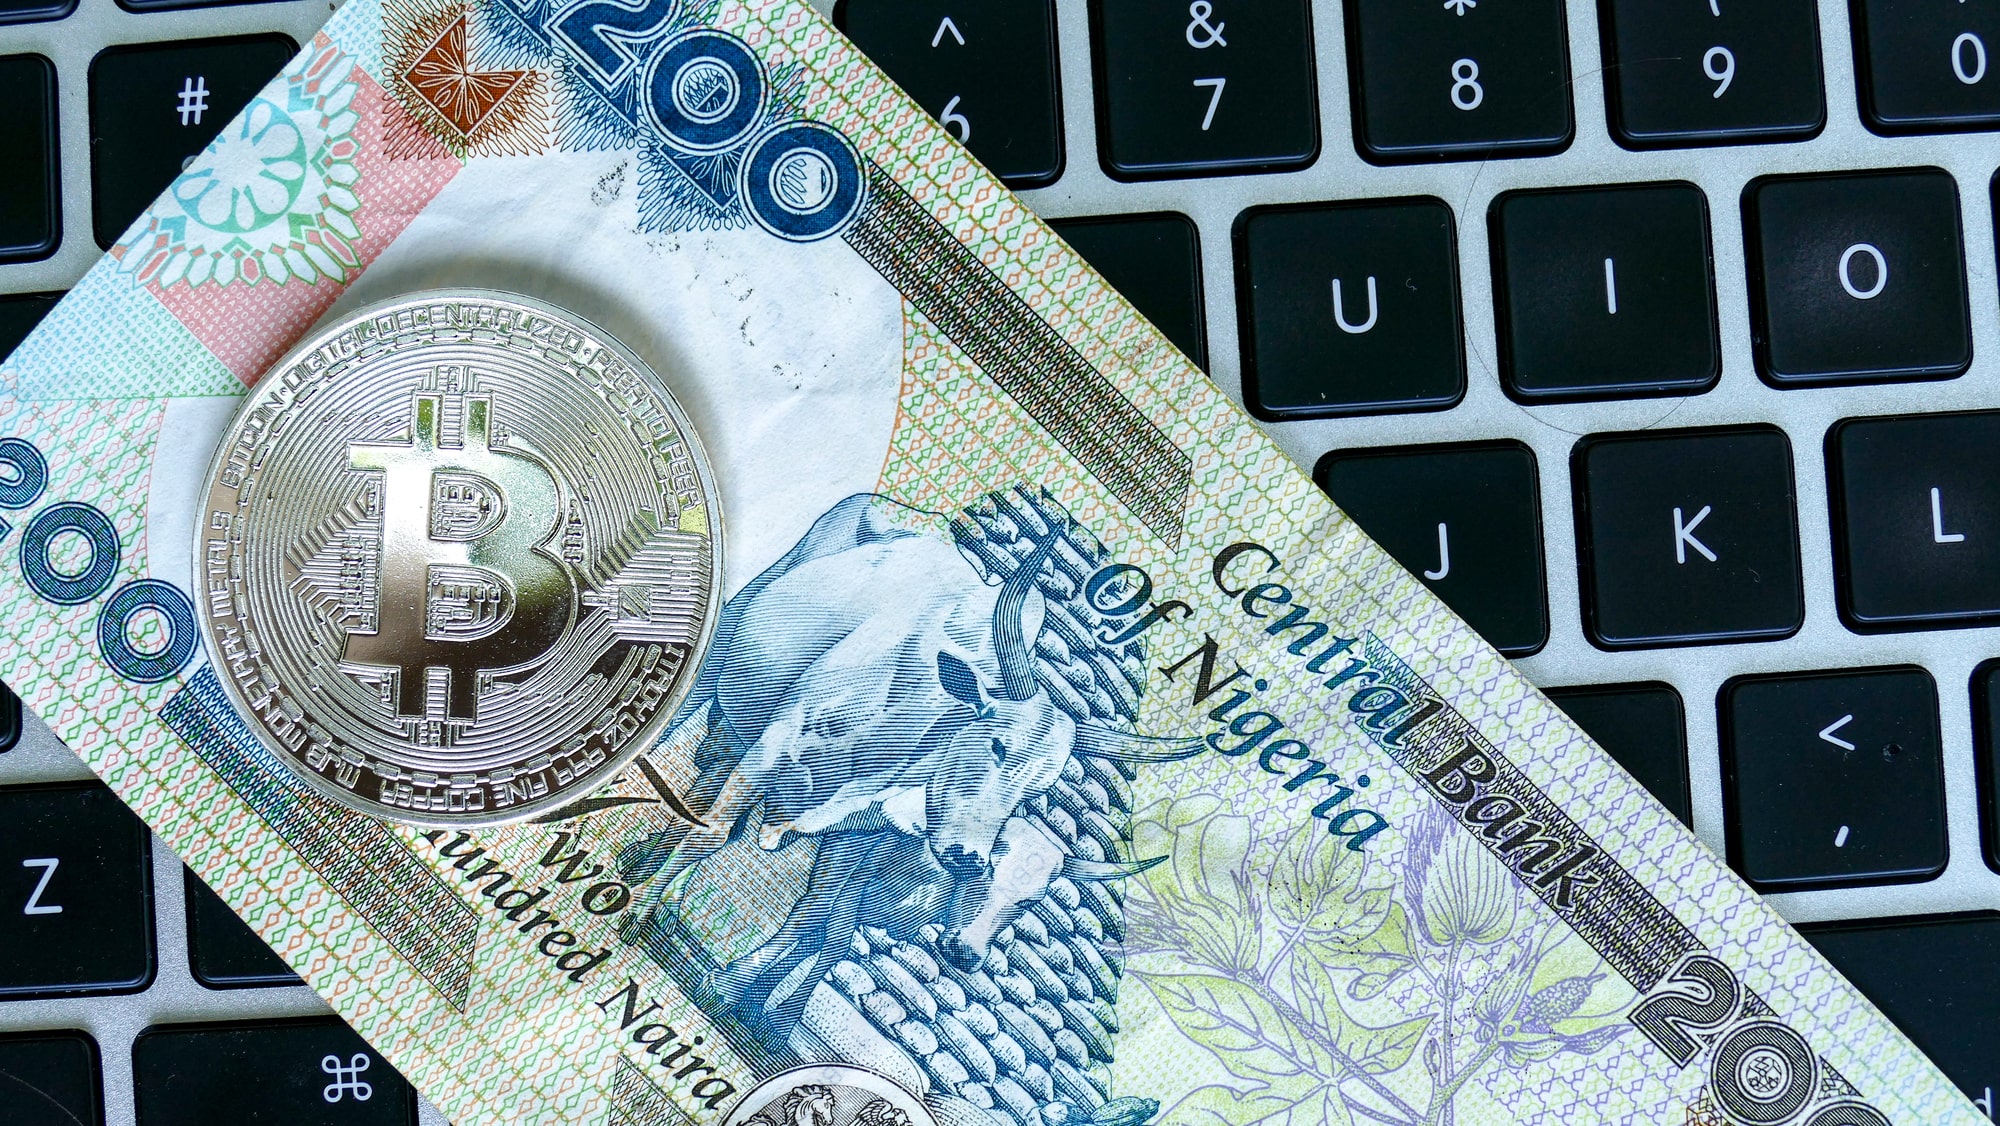 Will Africa’s next to adopt Bitcoin?